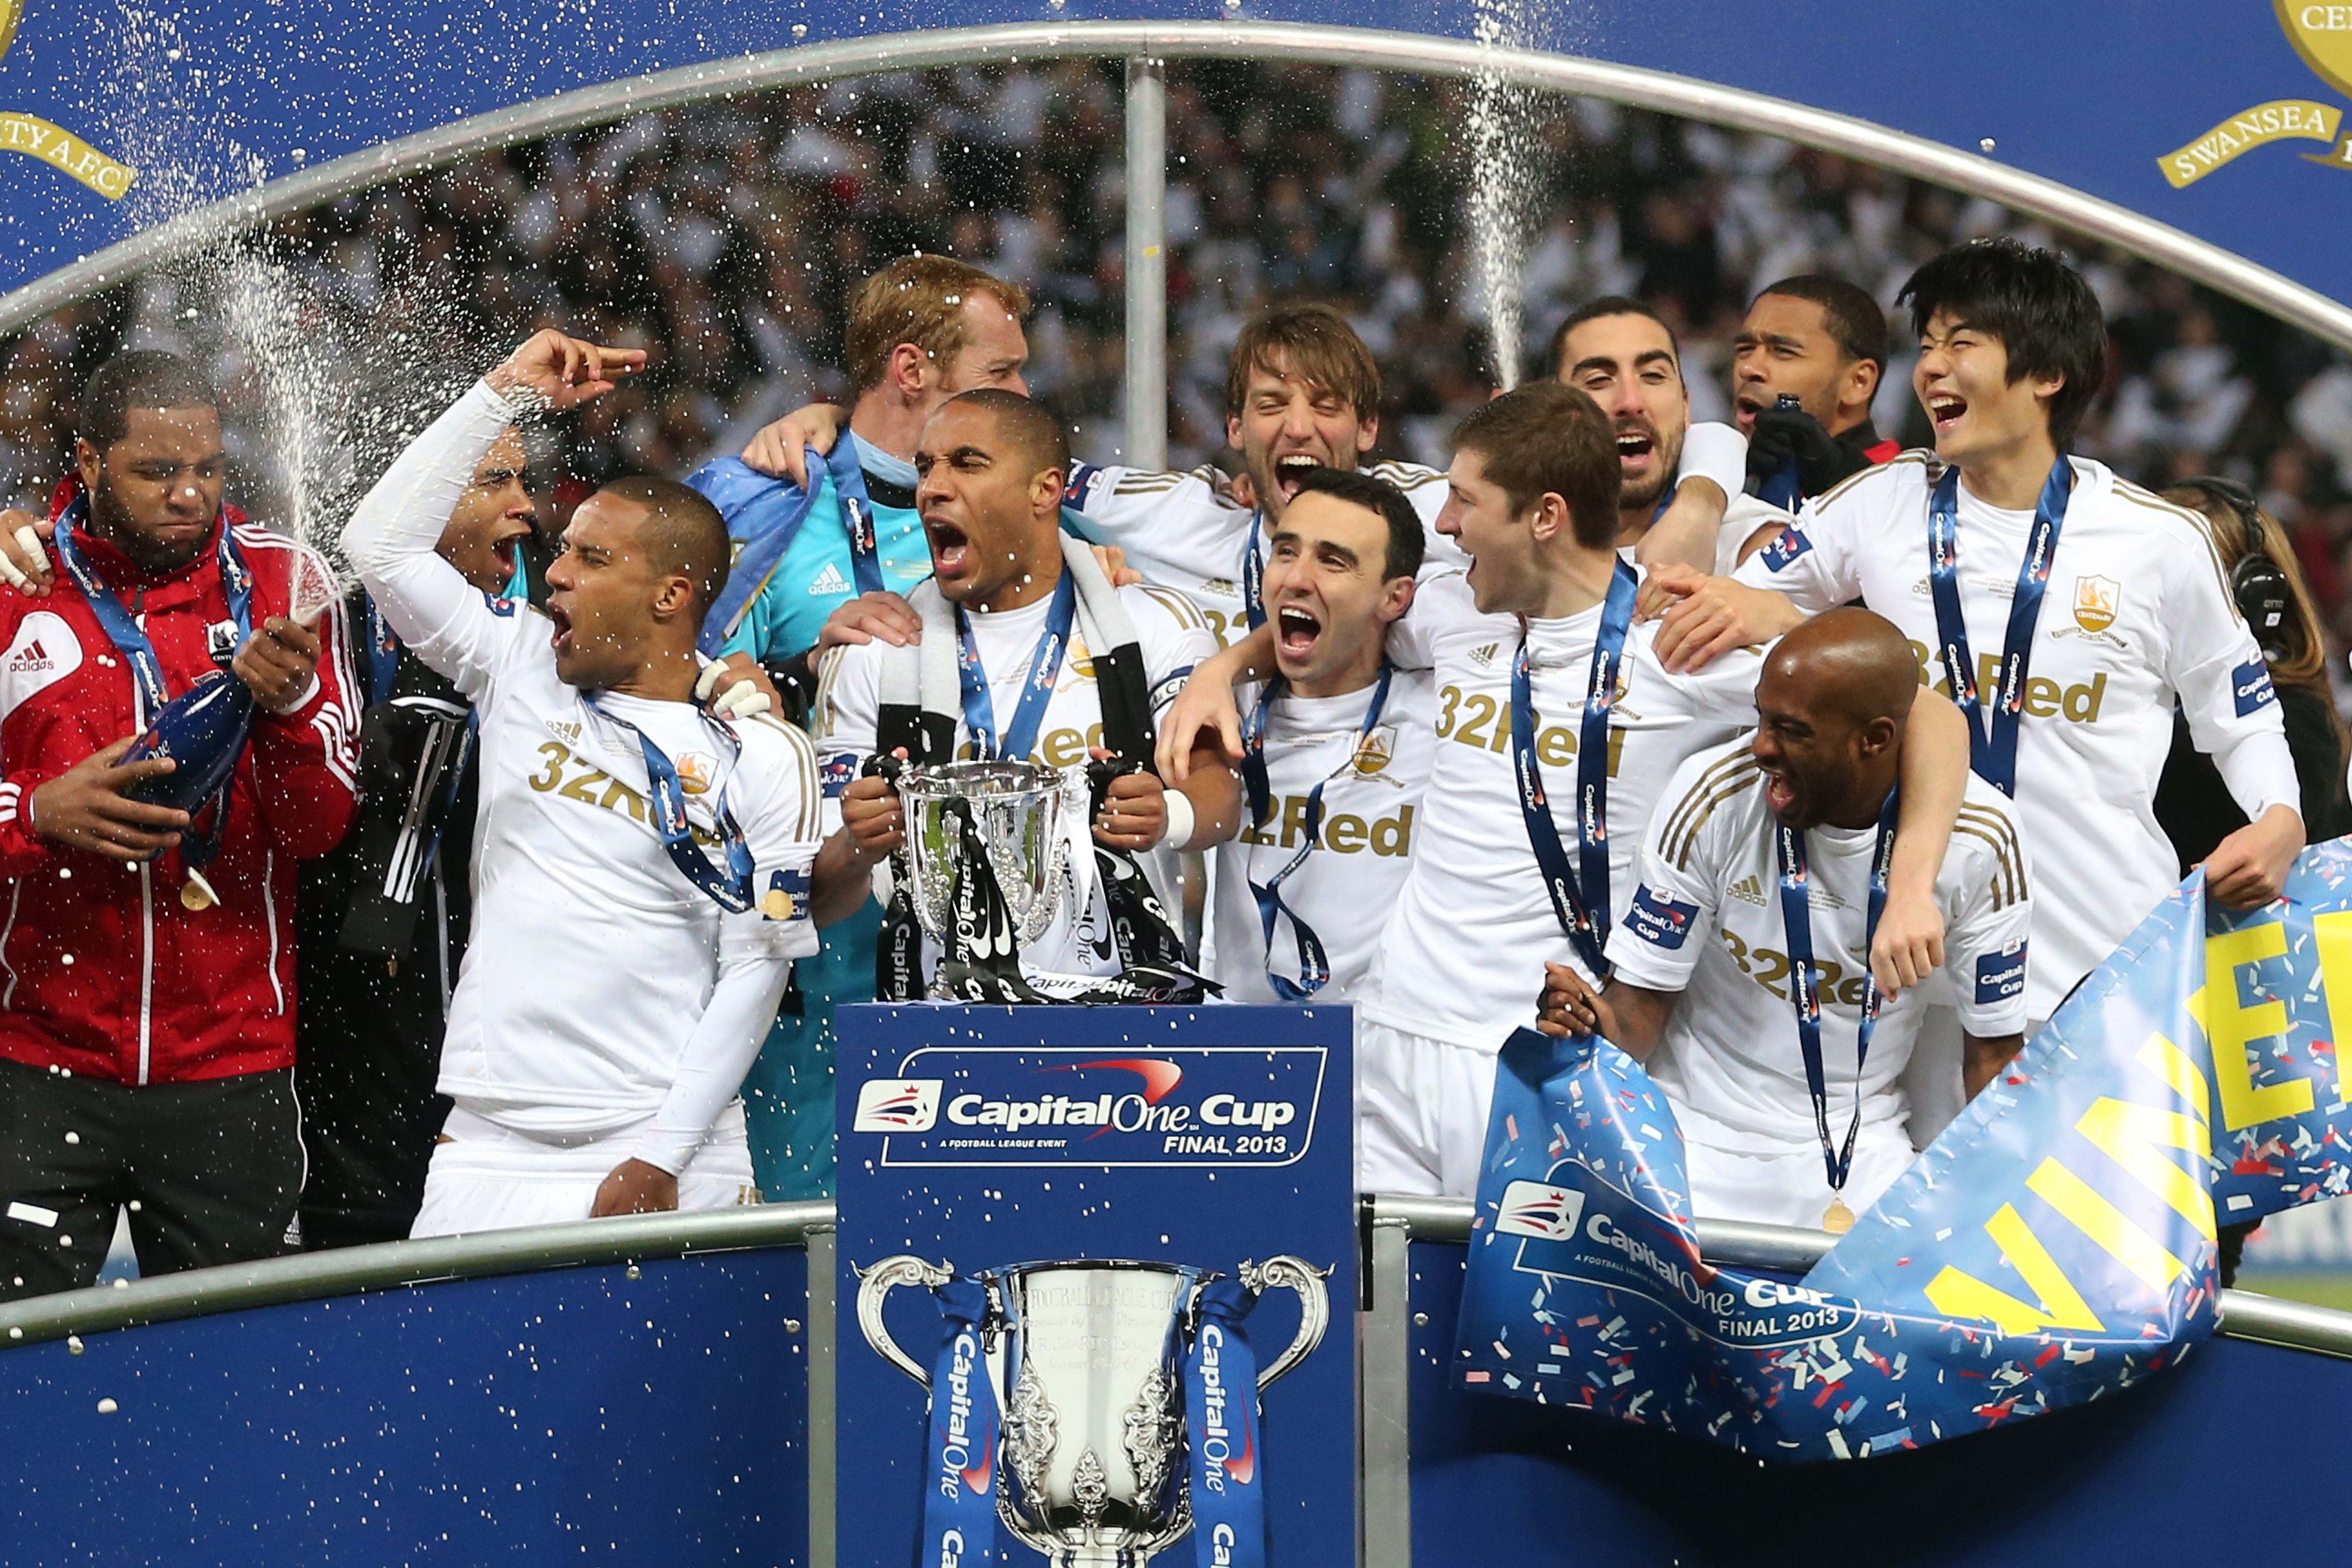 Swansea won the League Cup in 2013